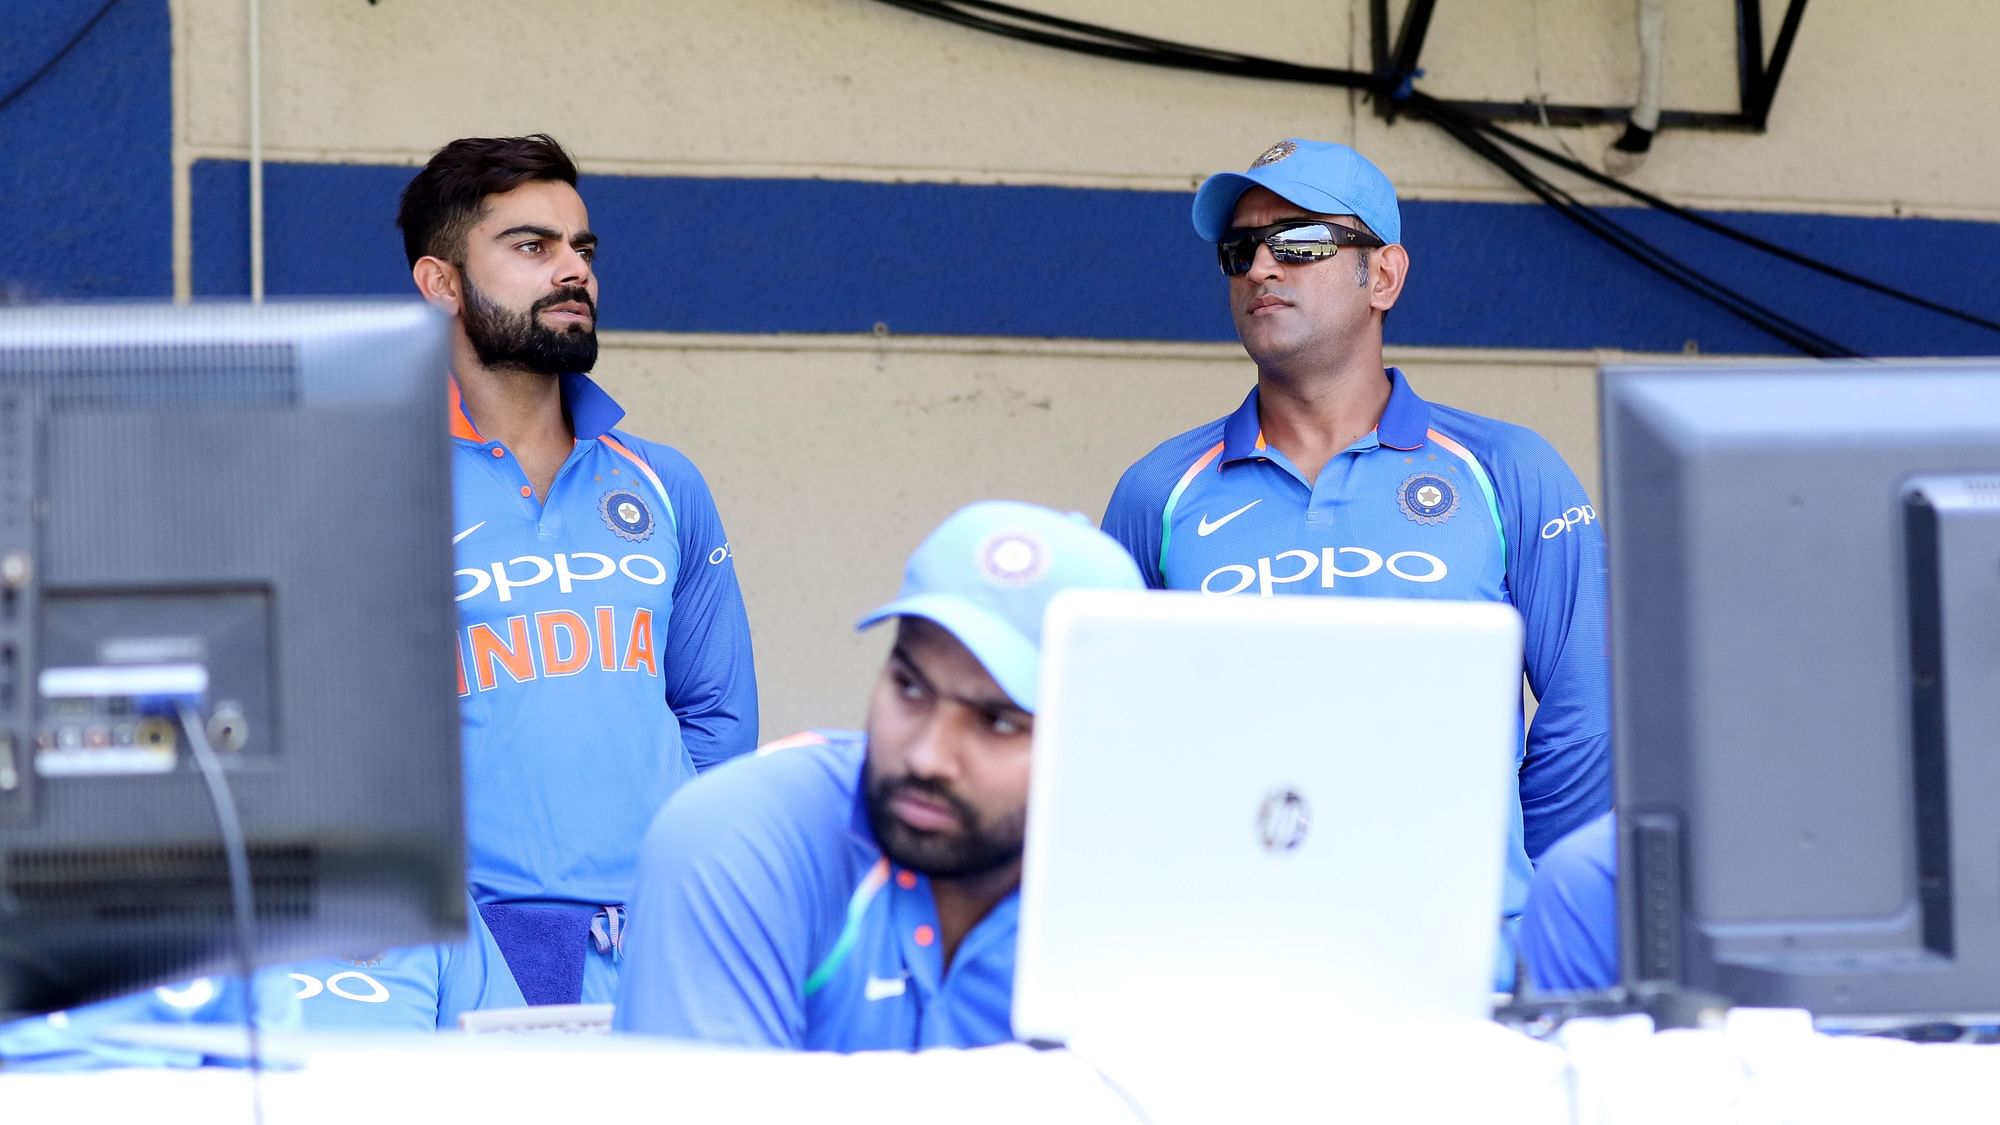 Former India chief selector M.S.K. Prasad listed out the differences between Mahendra Singh Dhoni, Virat Kohli and Rohit Sharma as captains.